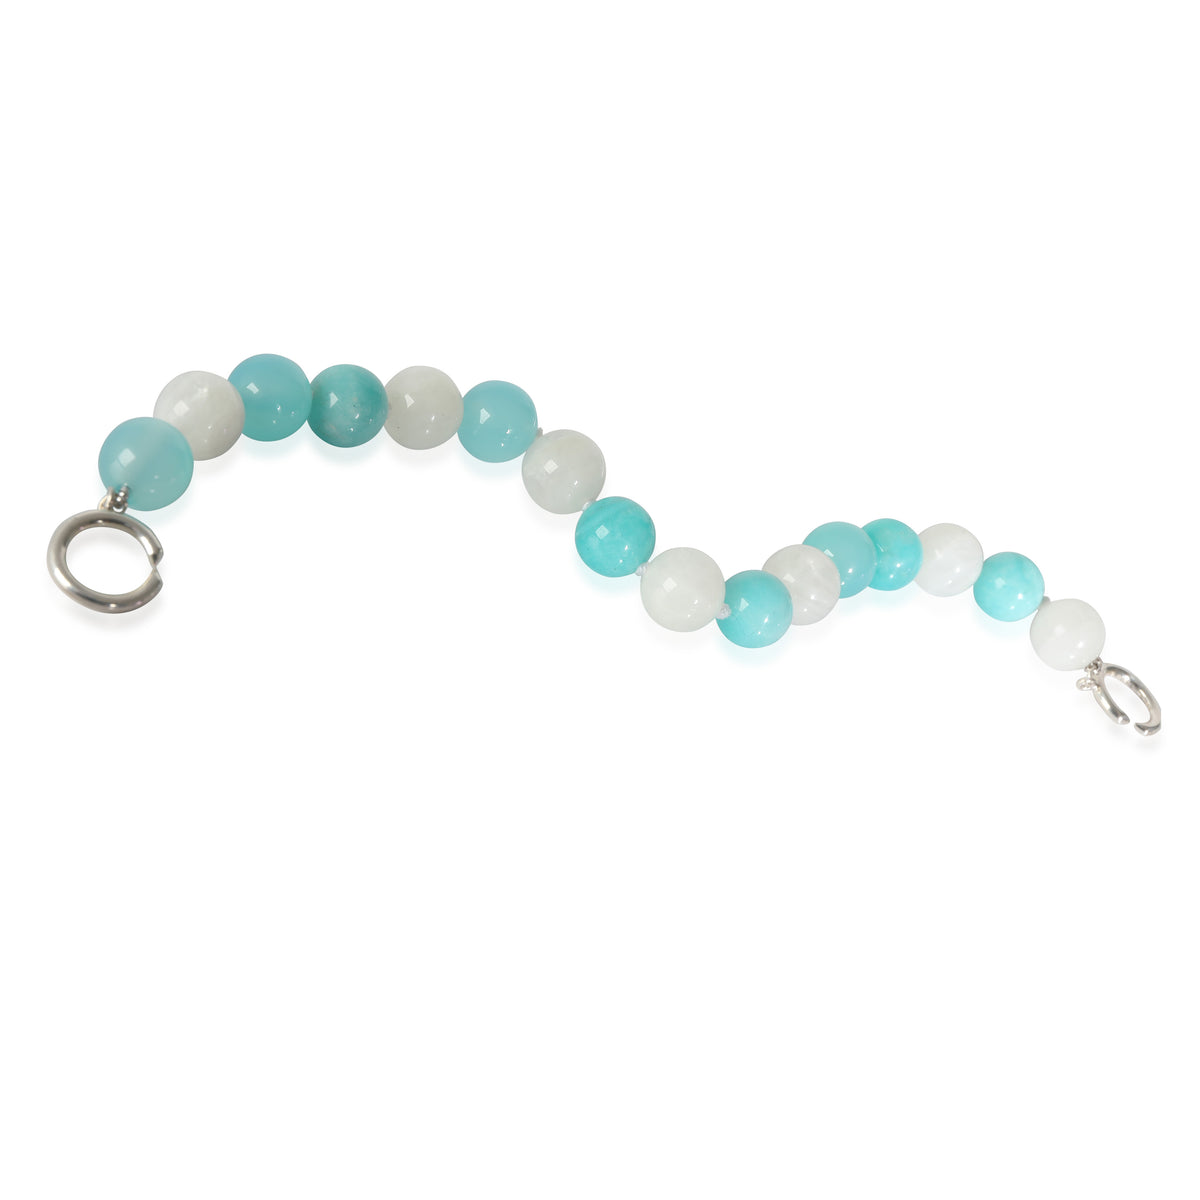 Tiffany & Co. Paloma Picasso Amazonite & Chalcedony Bracelet in  Sterling Silver